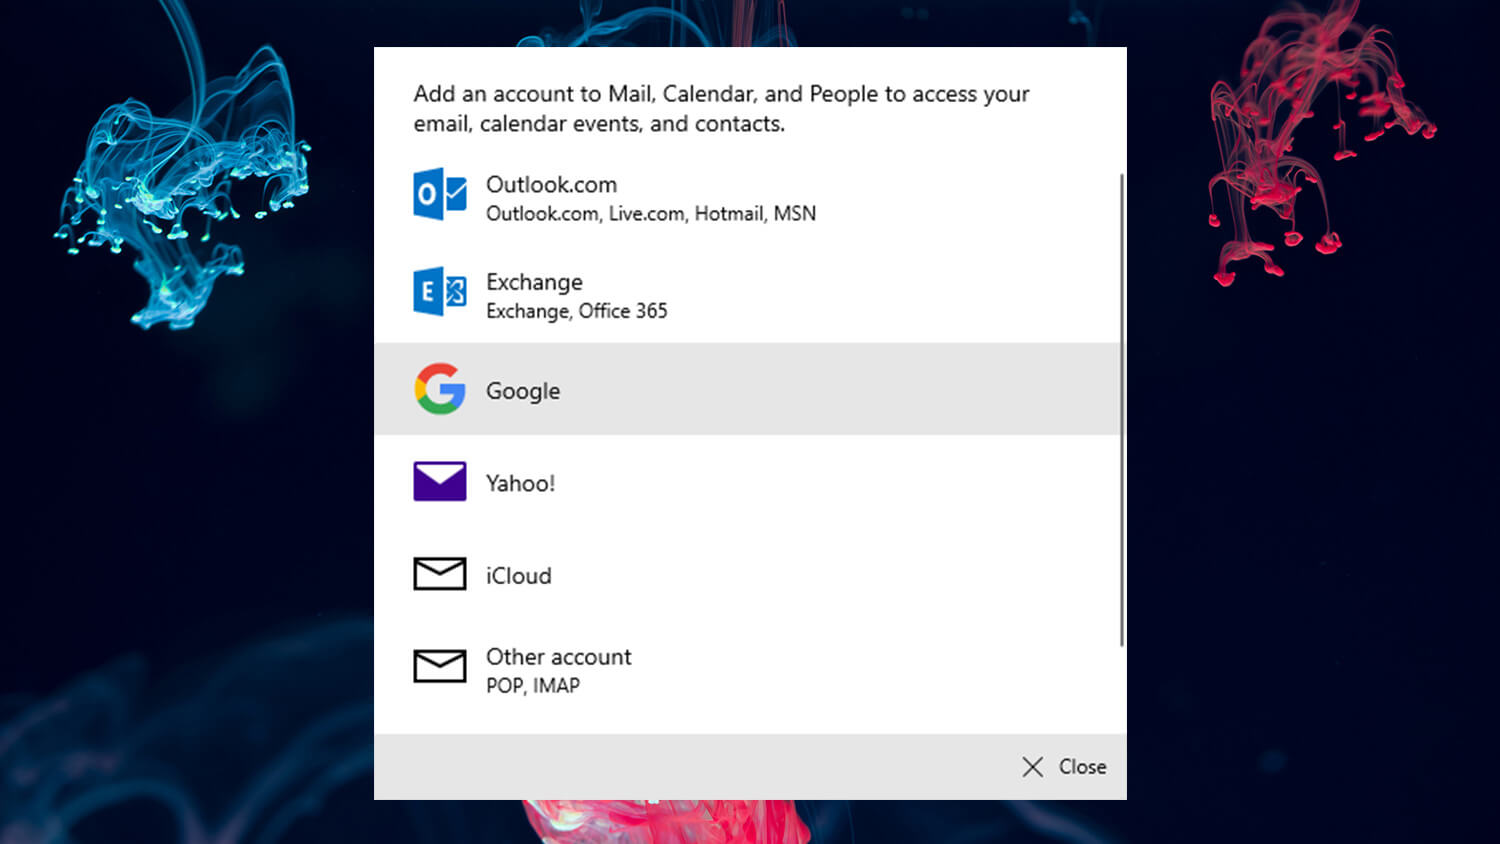 How to Add / Connect Gmail Account in Windows 10 Mail App